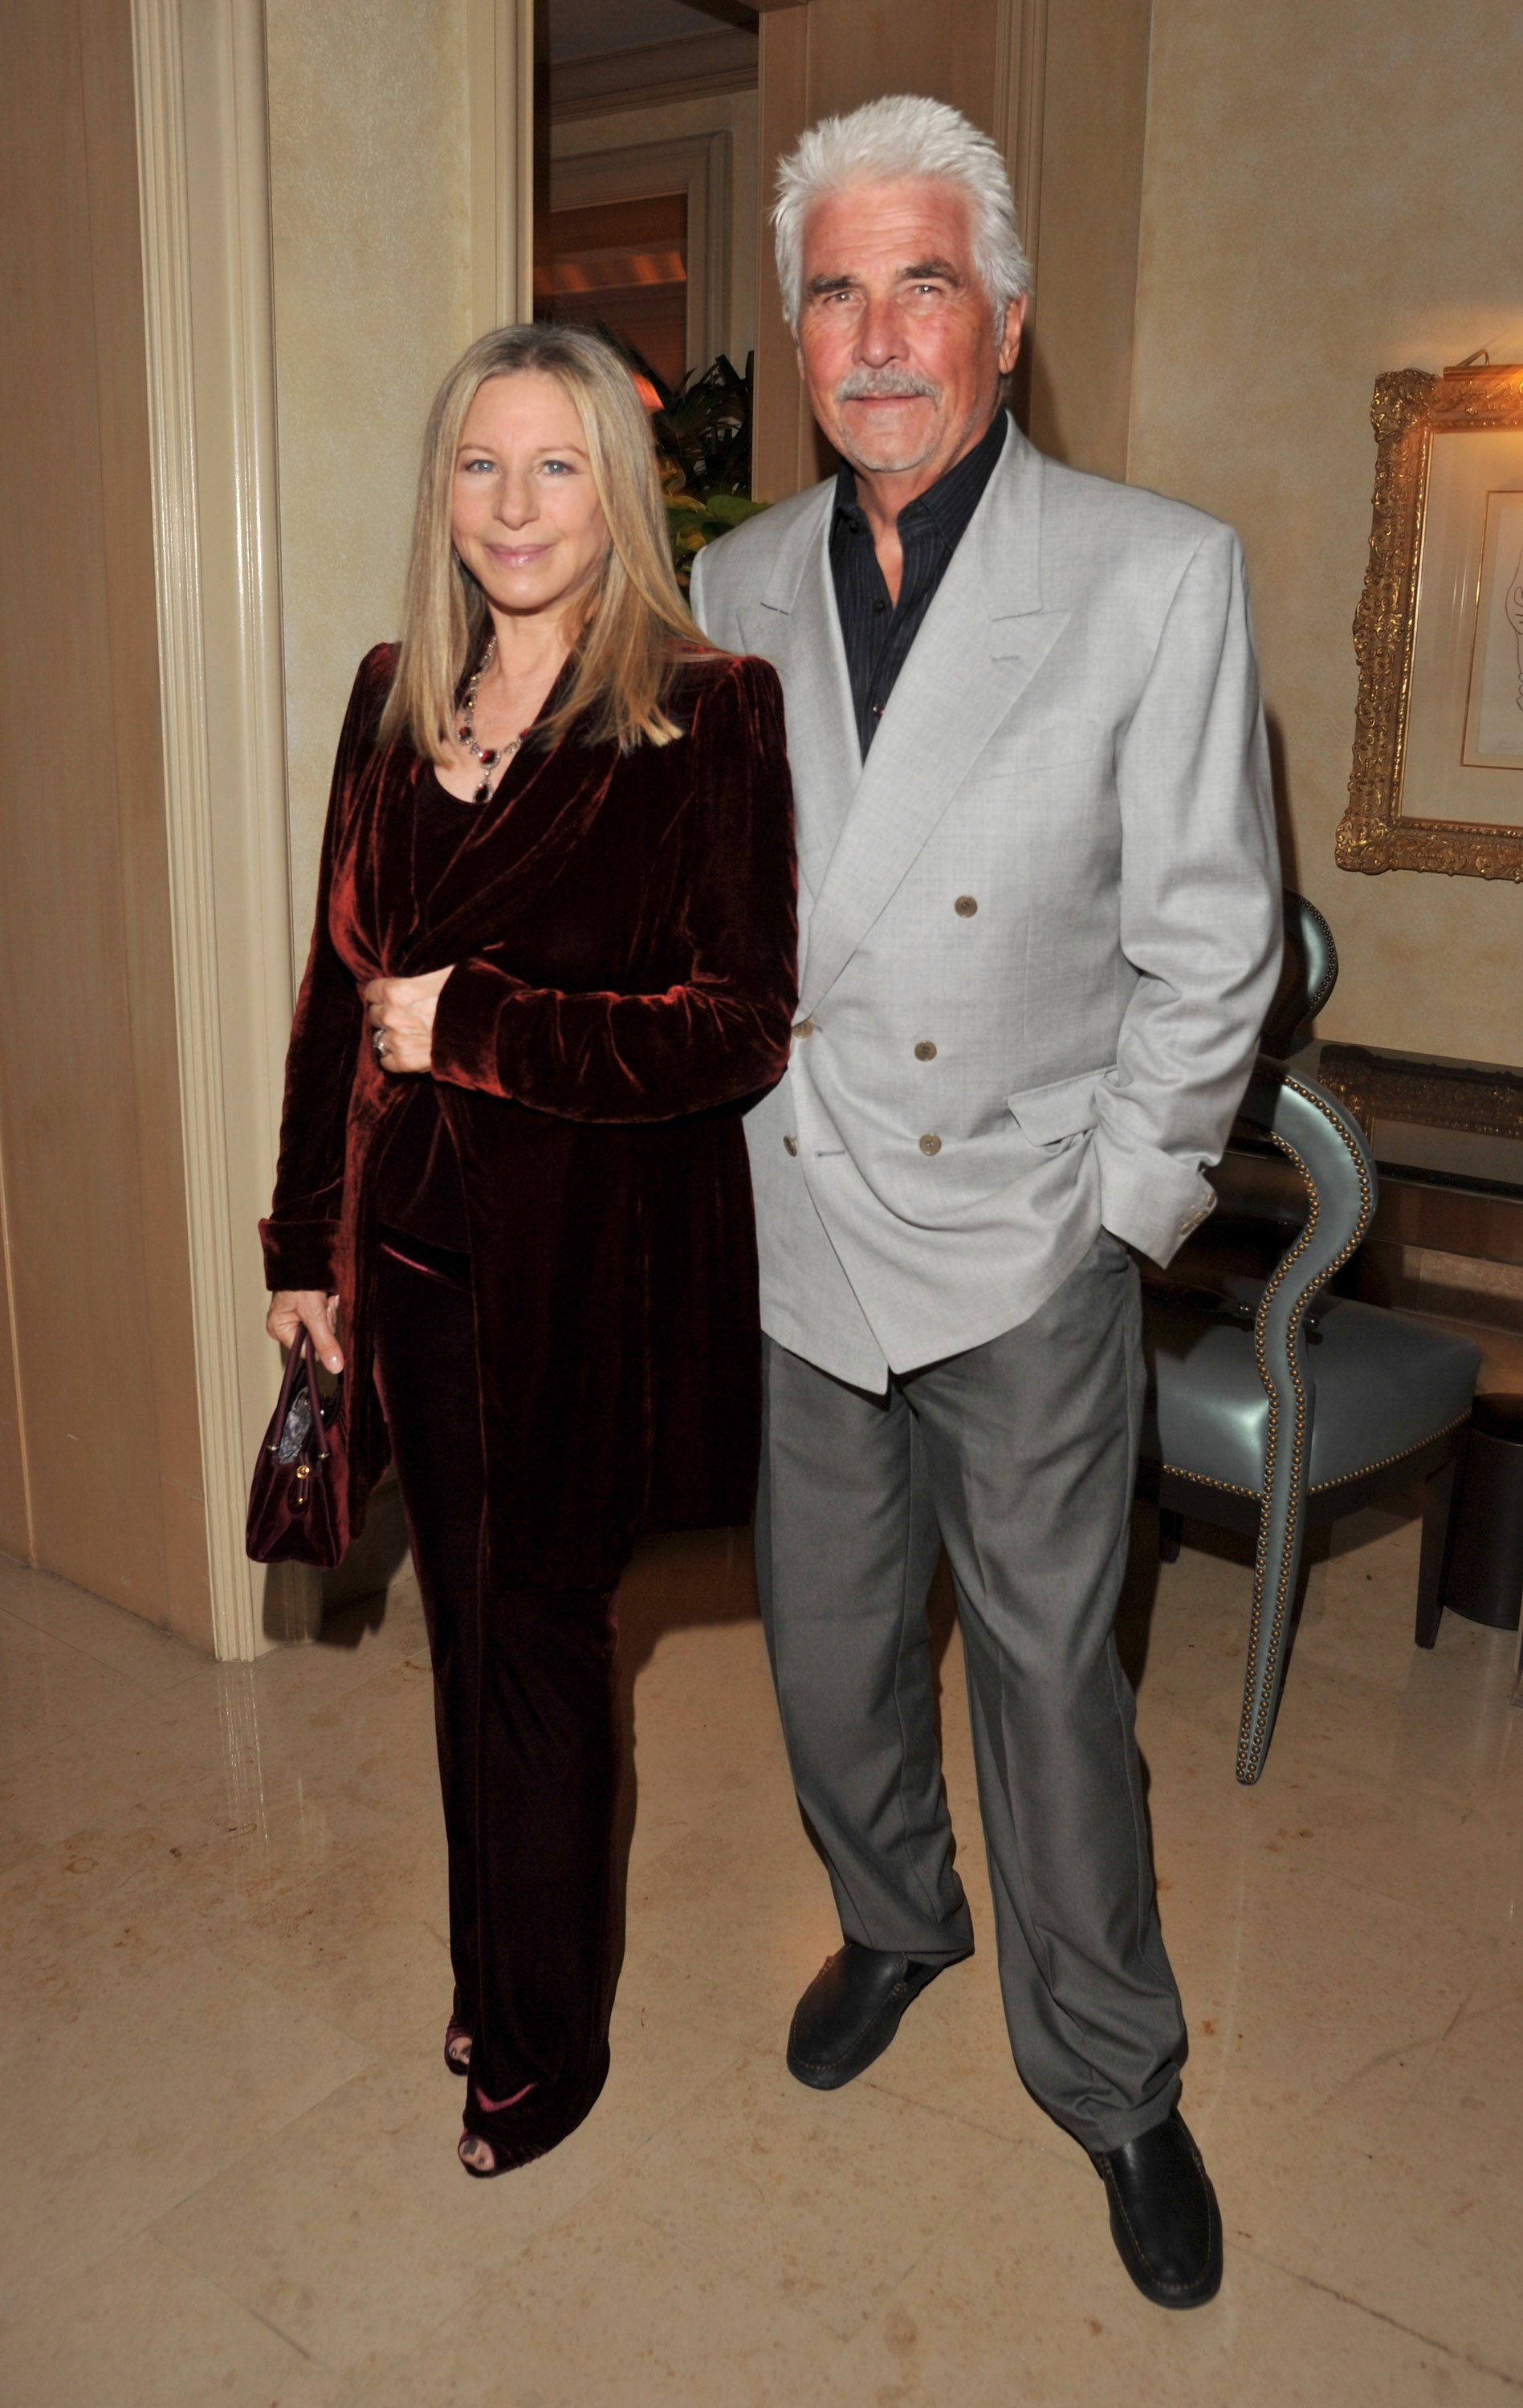 Barbra Streisand and James Brolin at ELLE's 18th Annual Women in Hollywood Tribute on October 17, 2011 in Beverly Hills, California. | Photo: Getty Images